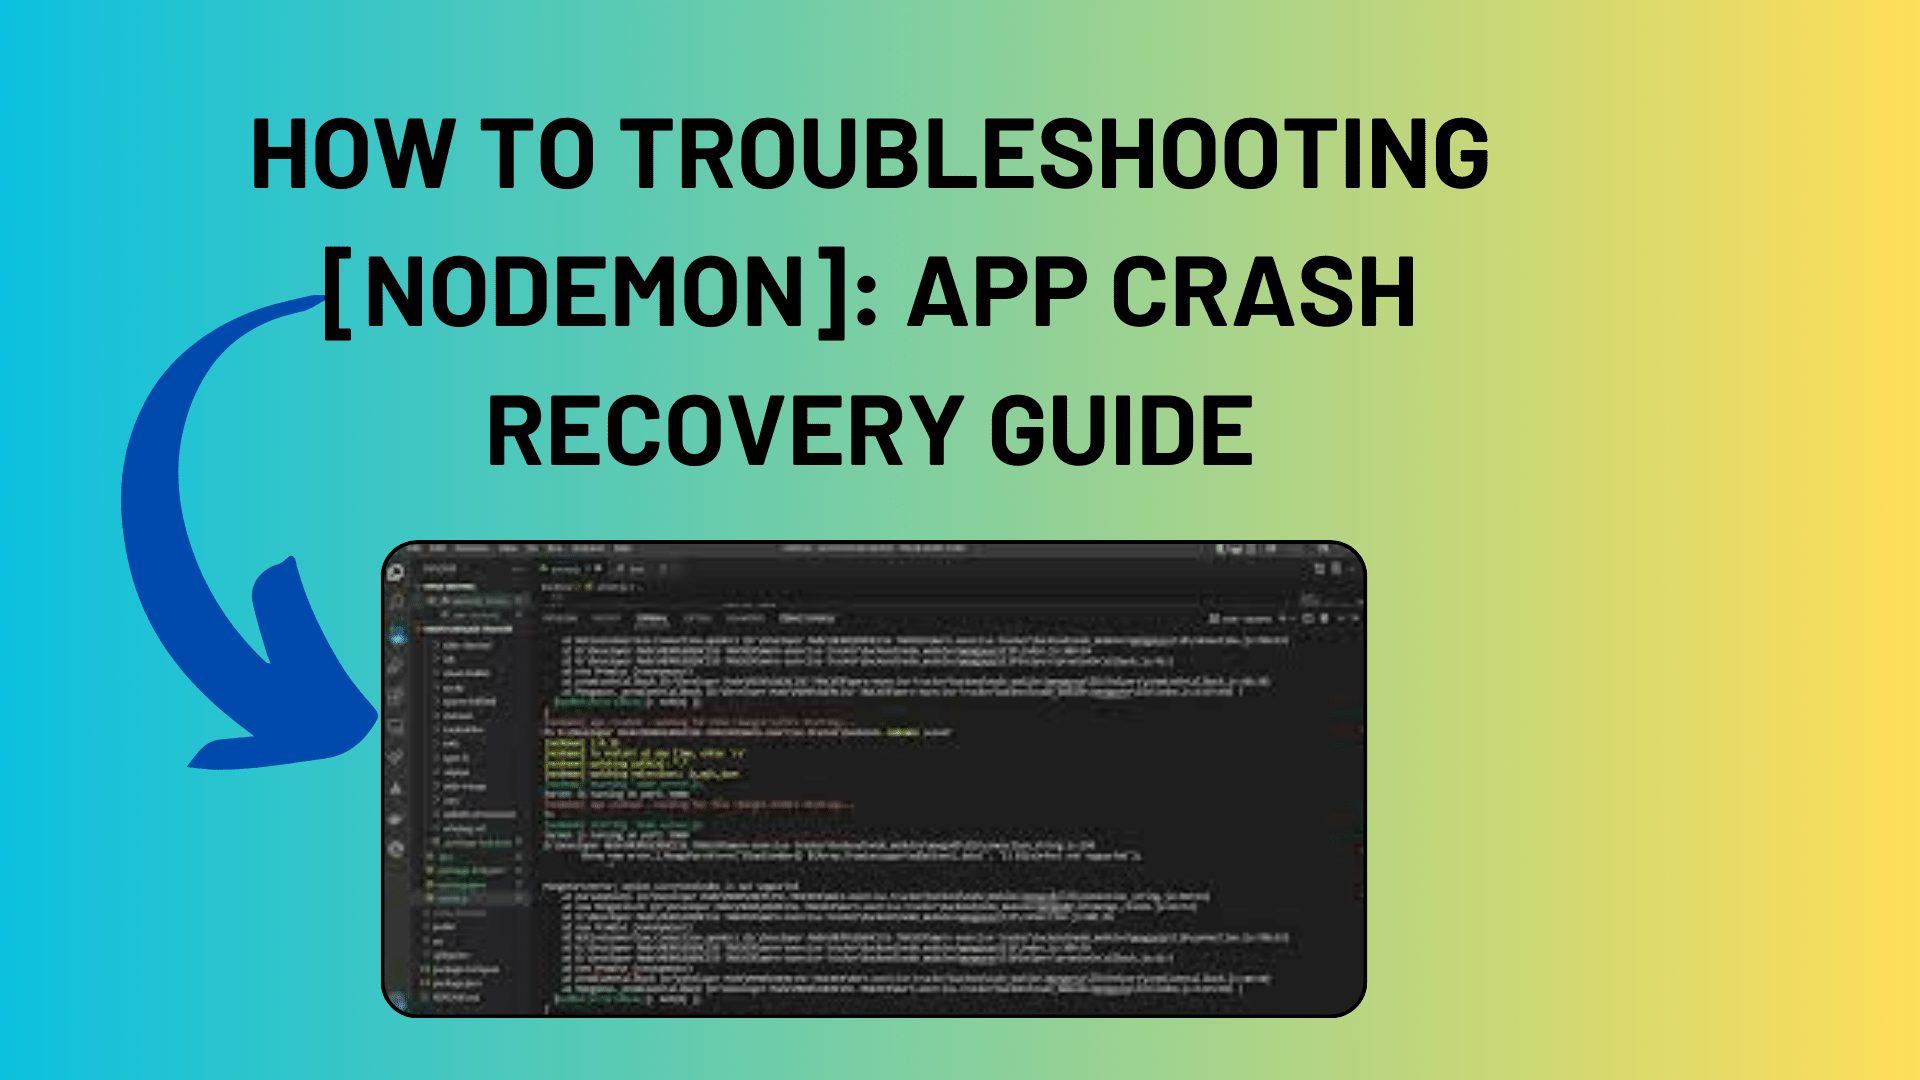 How To Troubleshooting [nodemon] App Crash Recovery Guide